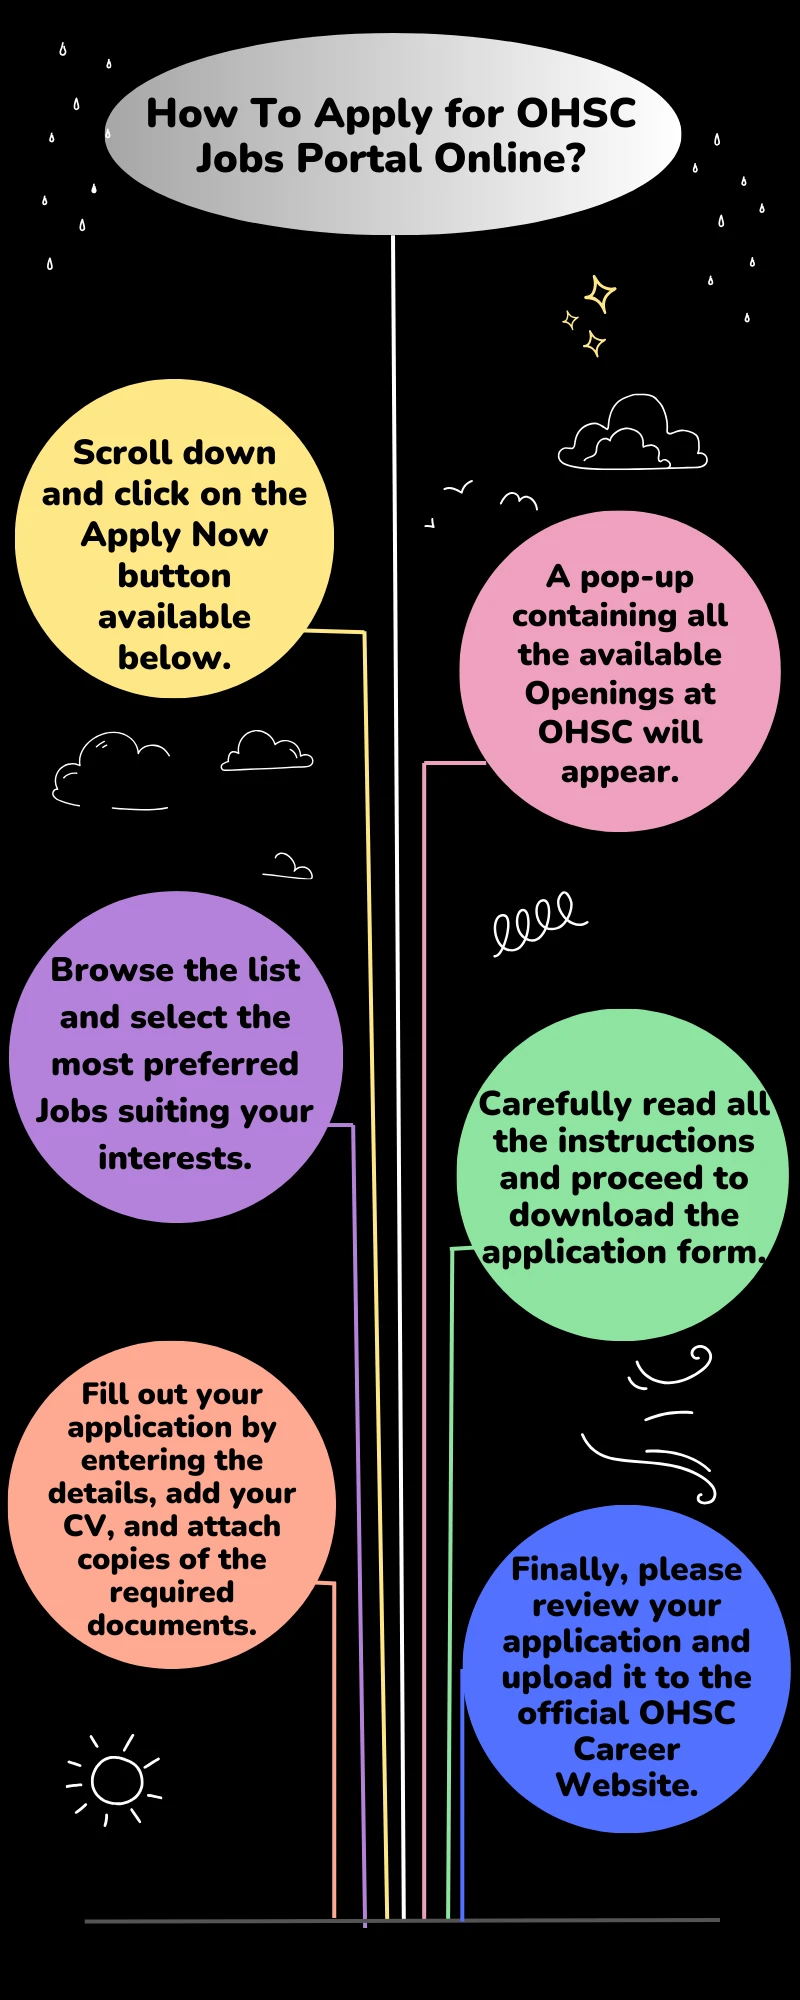 How To Apply for OHSC Jobs Portal Online?